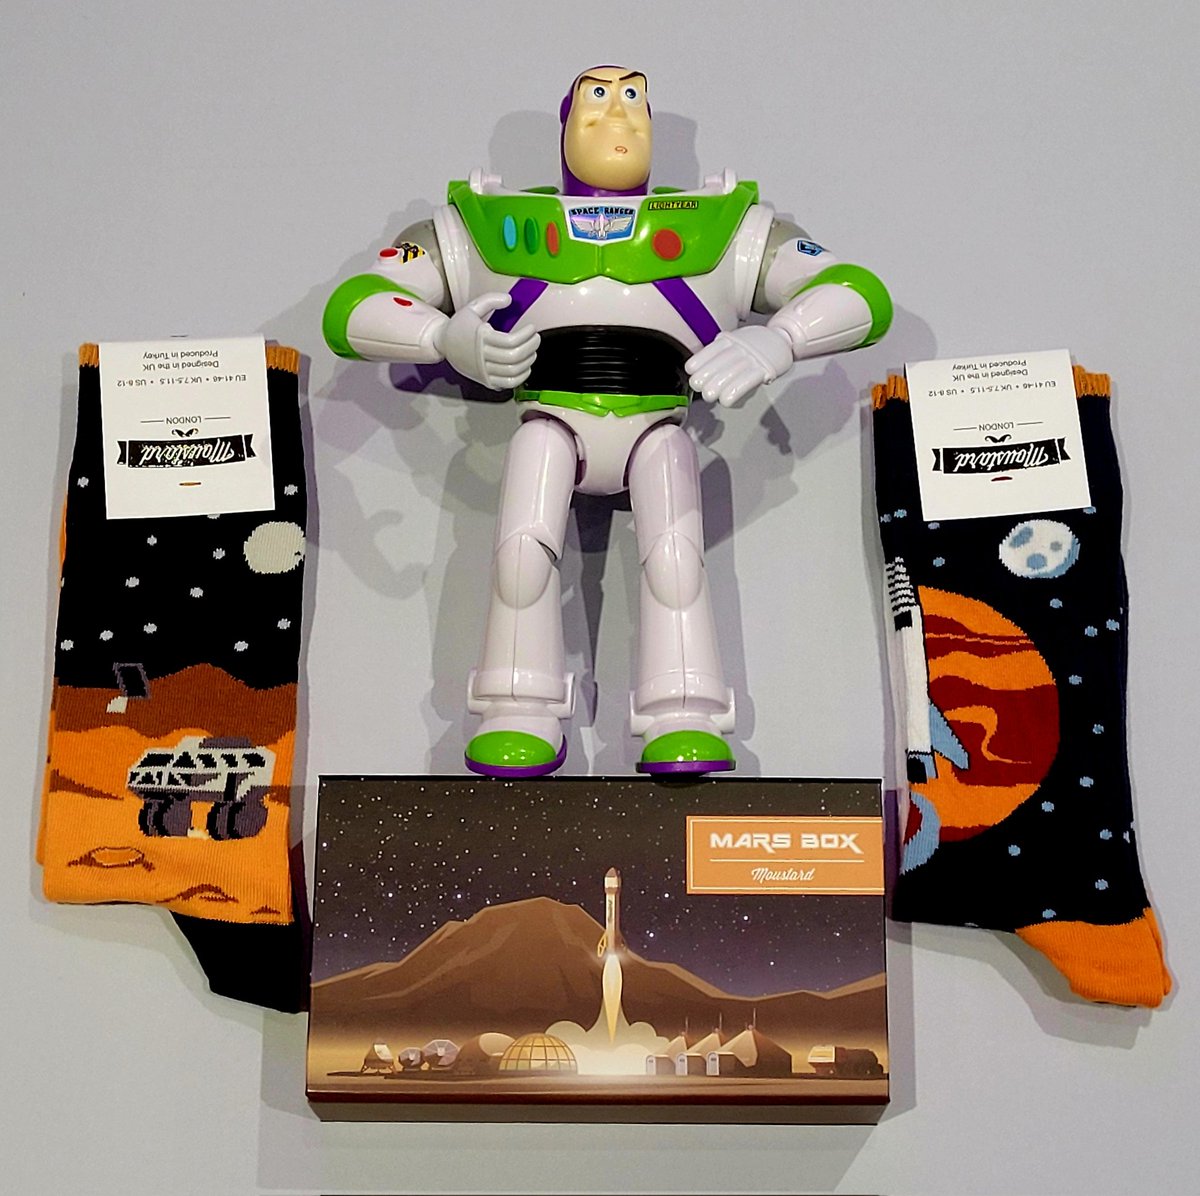 🚀To Infinity & Beyond🚀 💥NEW ARRIVALS💥 Martian sock box from @moustardLondon (Buzz not included) Shop in store & online ⬇️ eclectichound.co.uk/products/marti… . . . #MartianSockBox #RockYourSocks #FunSocks #EclecticHound #AntiBland #HelloWinchester #WinchesterIndependents #ShopSmall